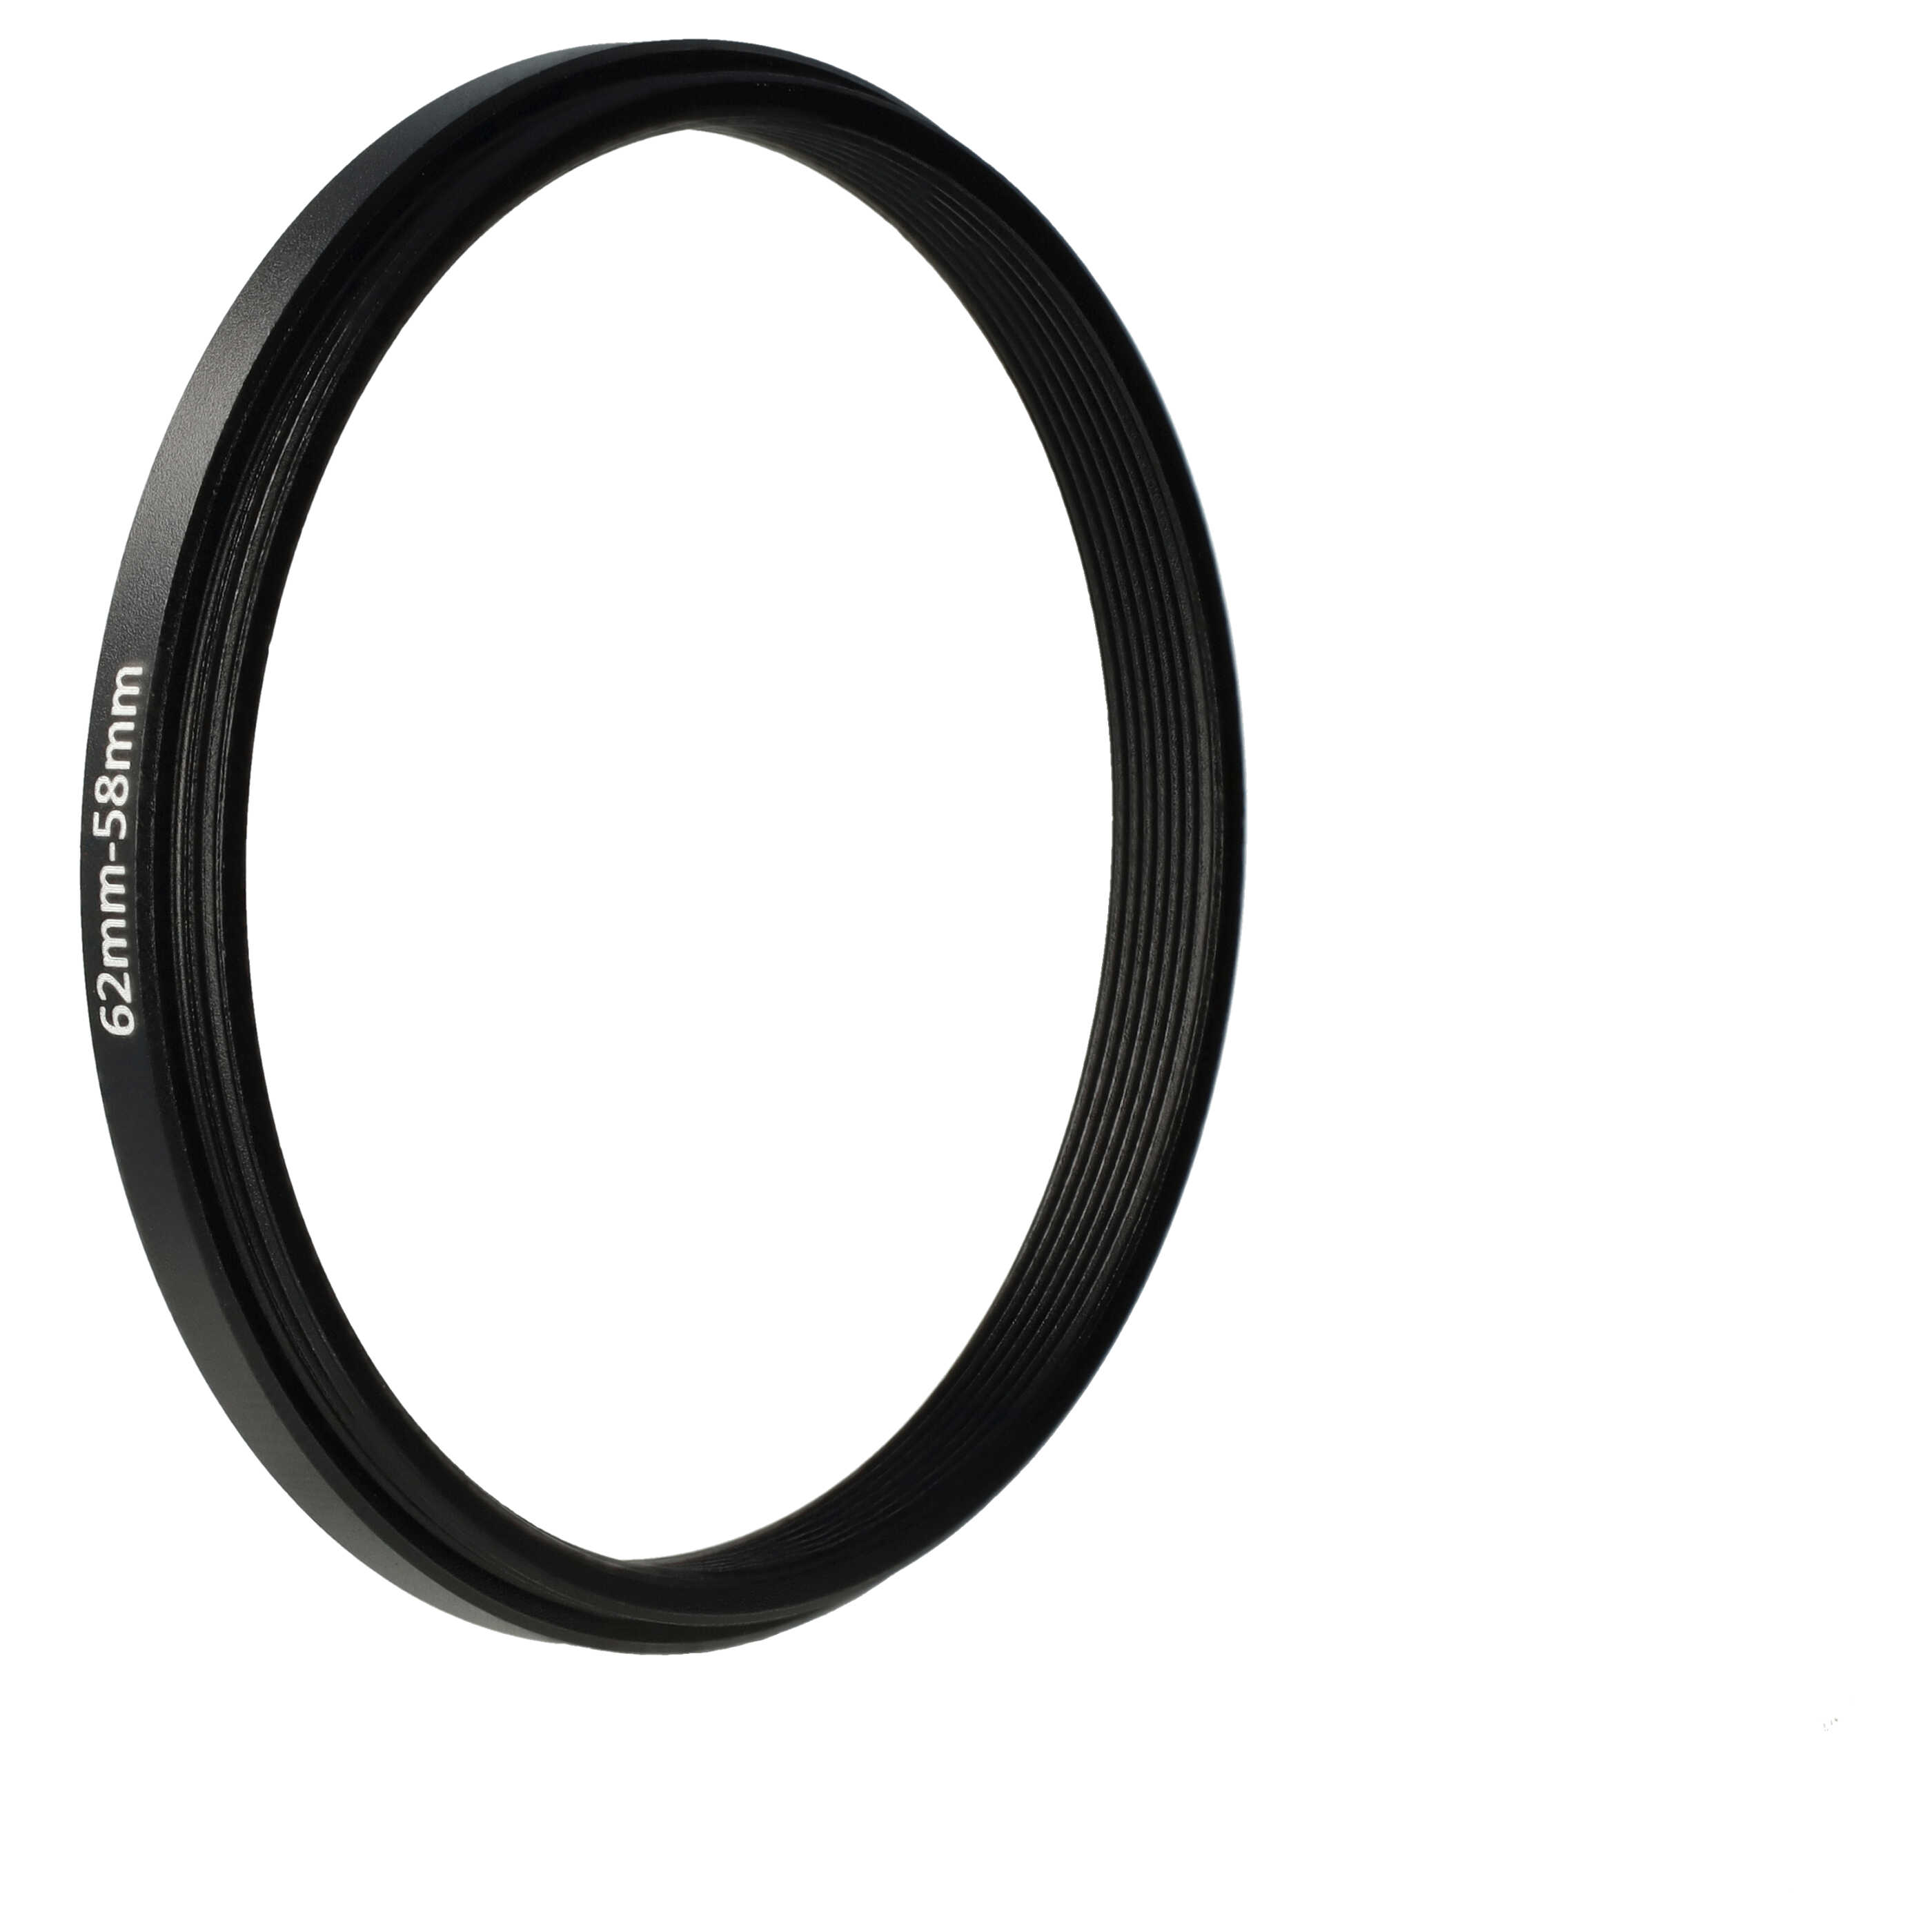 Step-Down Ring Adapter from 62 mm to 58 mm suitable for Camera Lens - Filter Adapter, metal